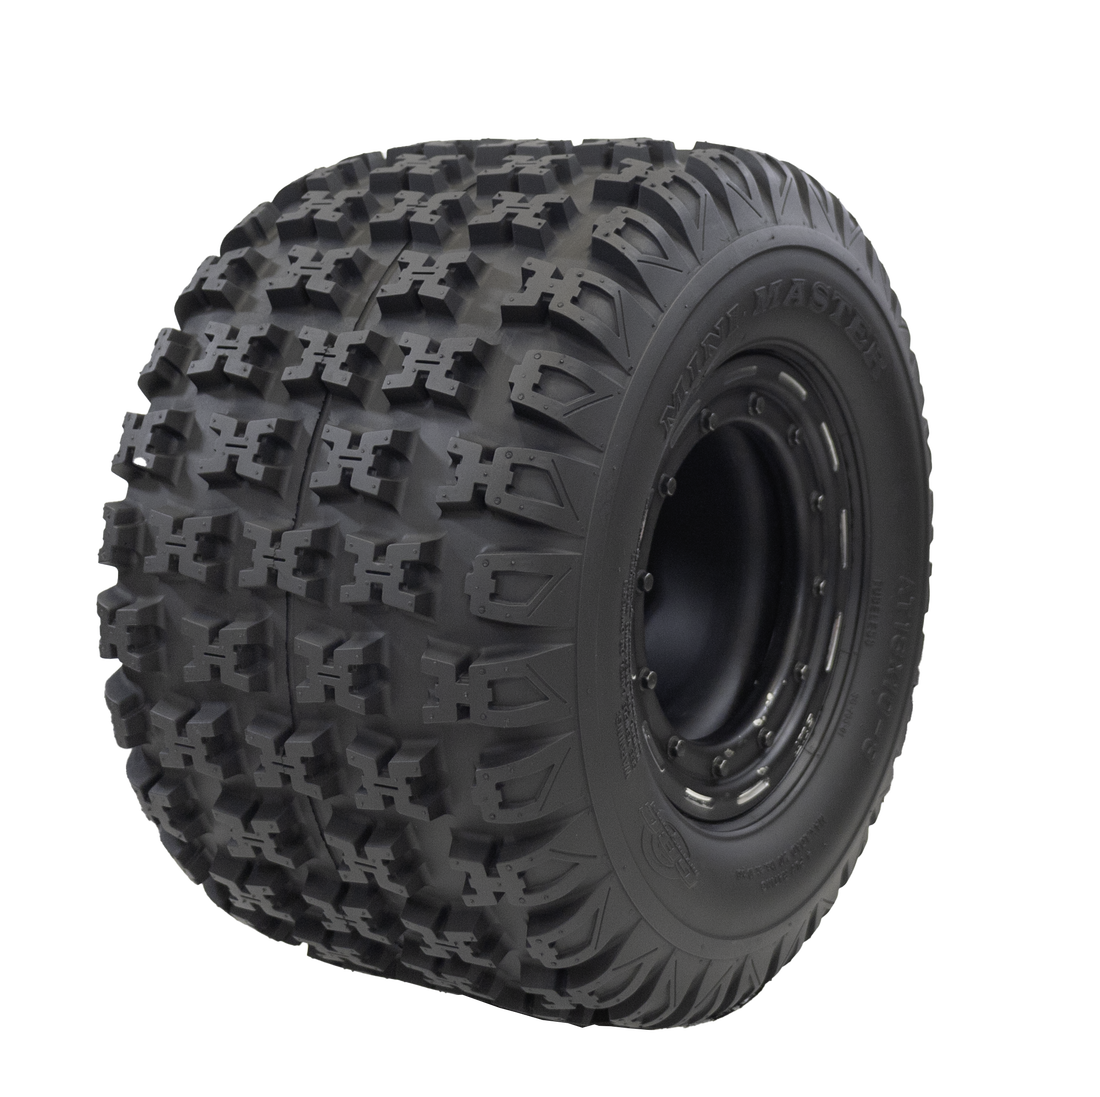 Angle view of Mini Master ATV/UTV tire, exhibiting the X-type lug tread design for superior terrain grip and traction. The image also showcases a bit of the sidewall and the sleek rim.